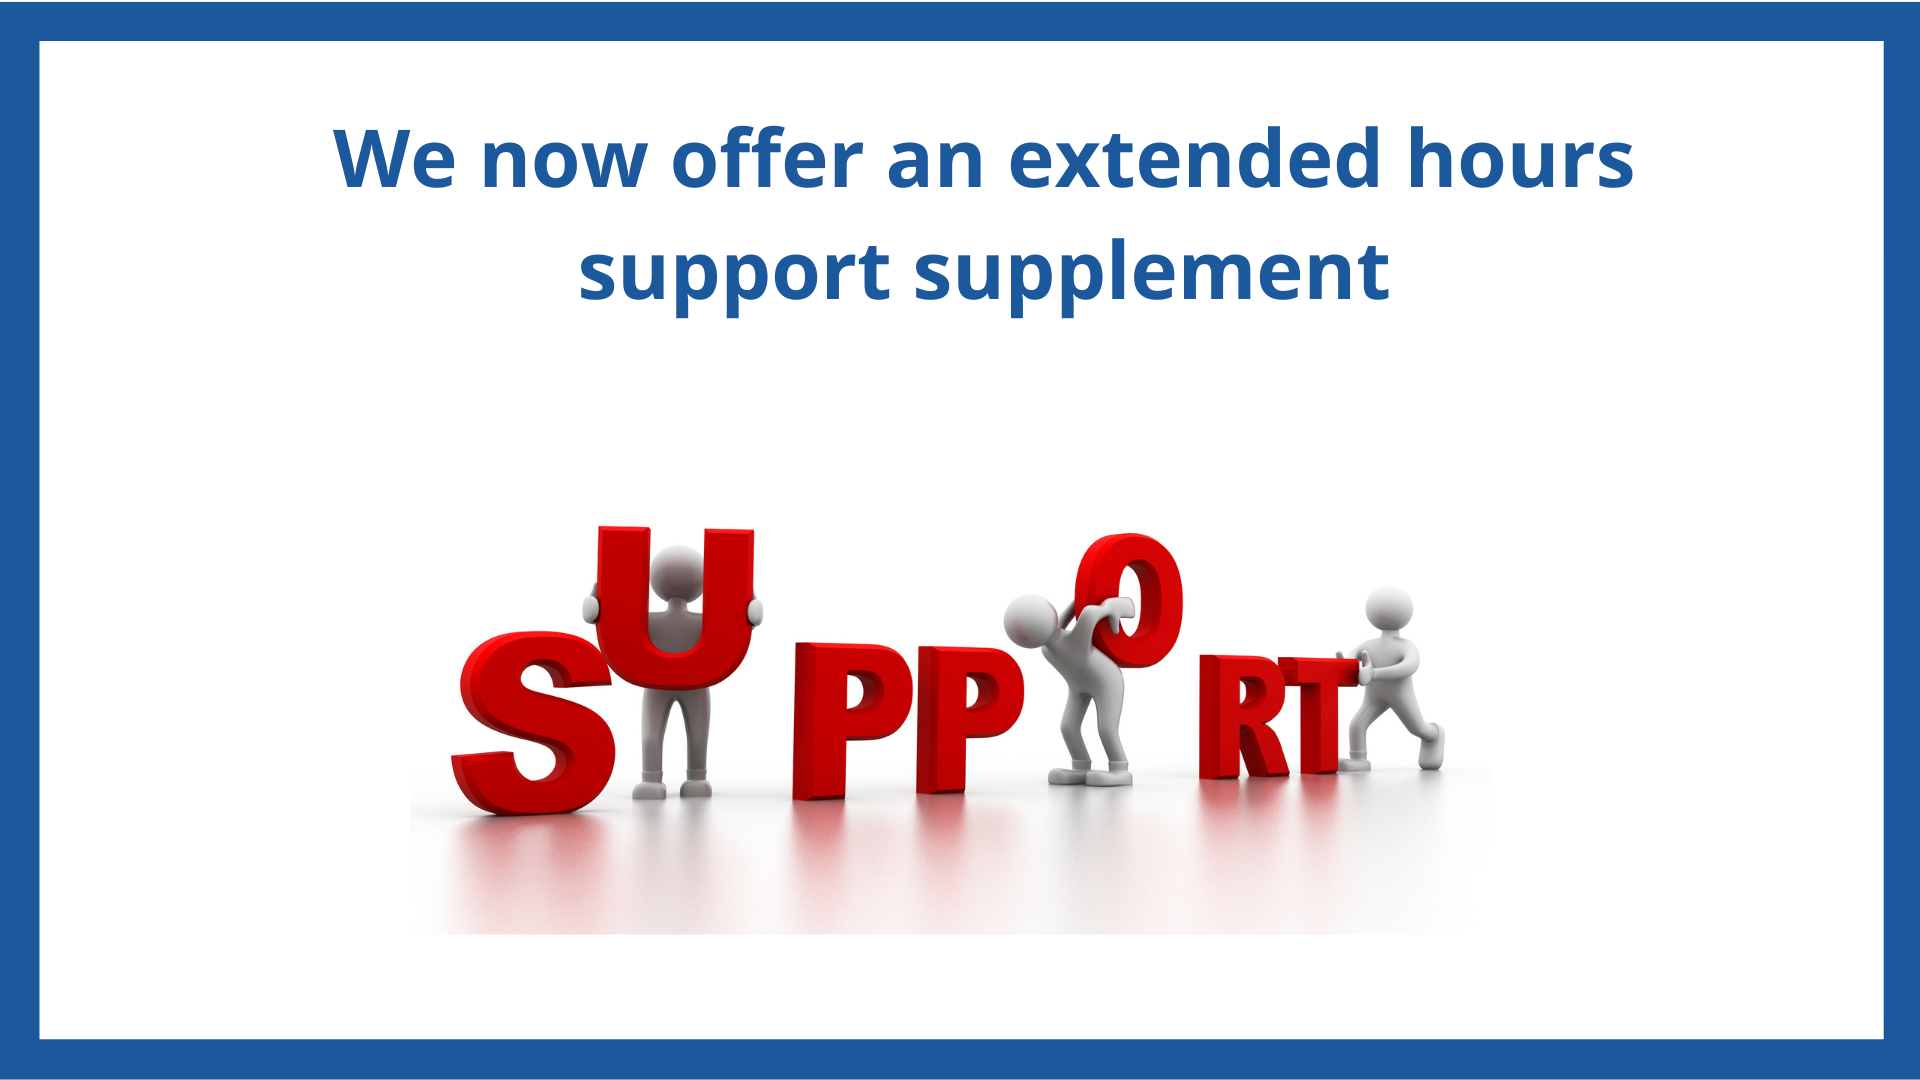 extend hours support